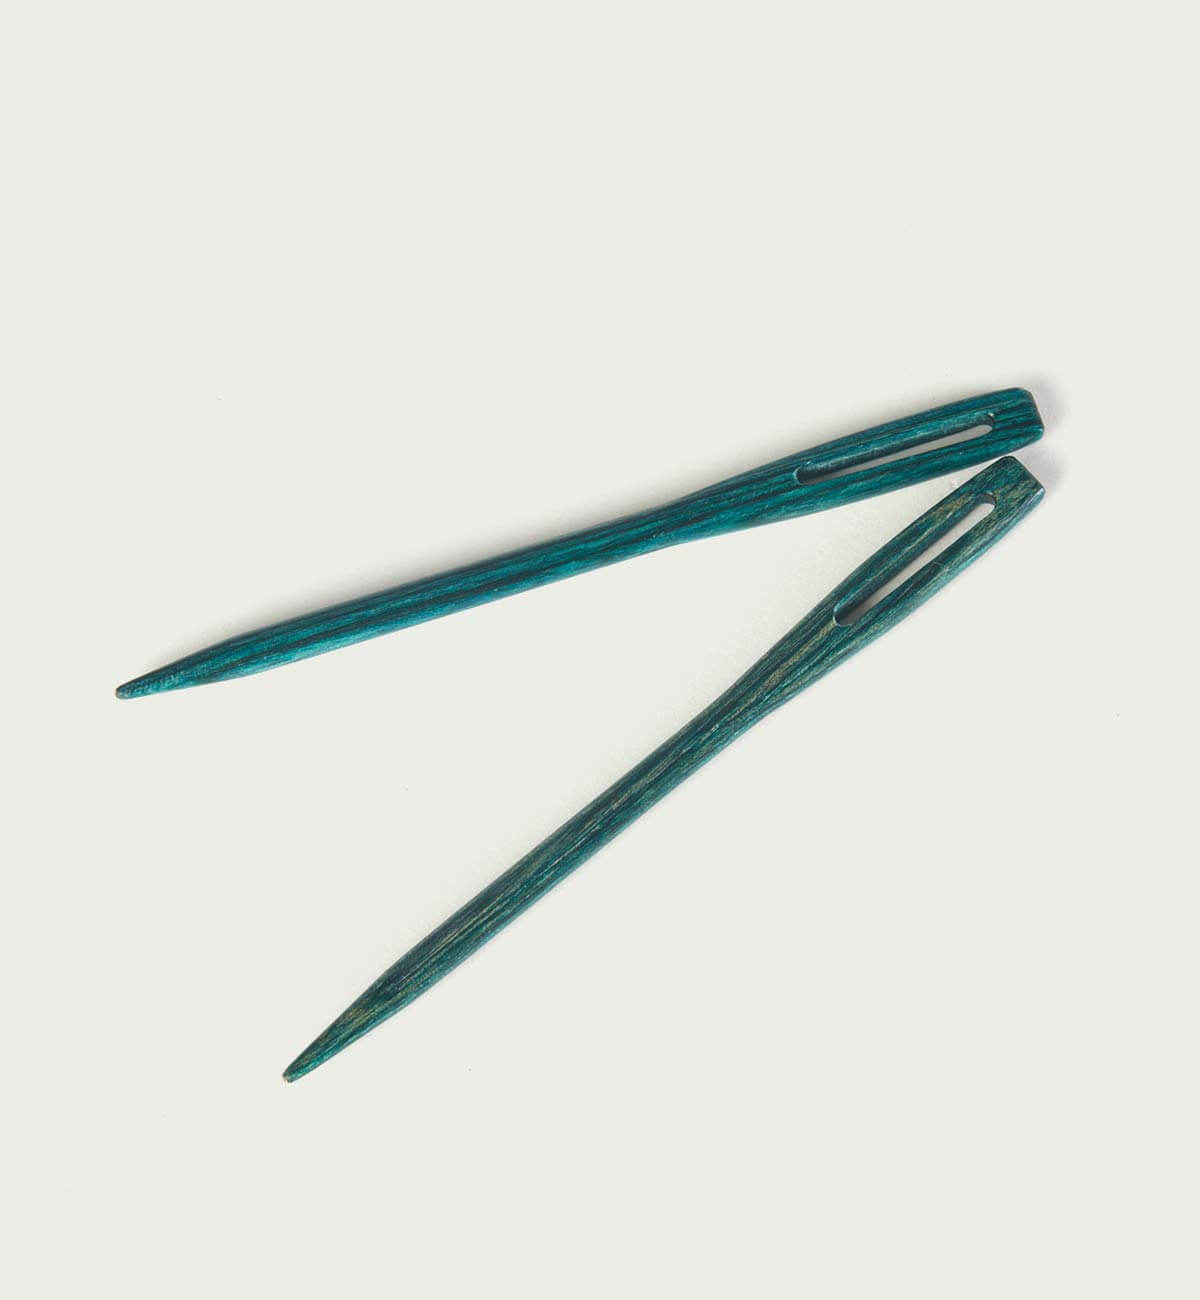 Mindful Collection Teal Wooden Darning Needles